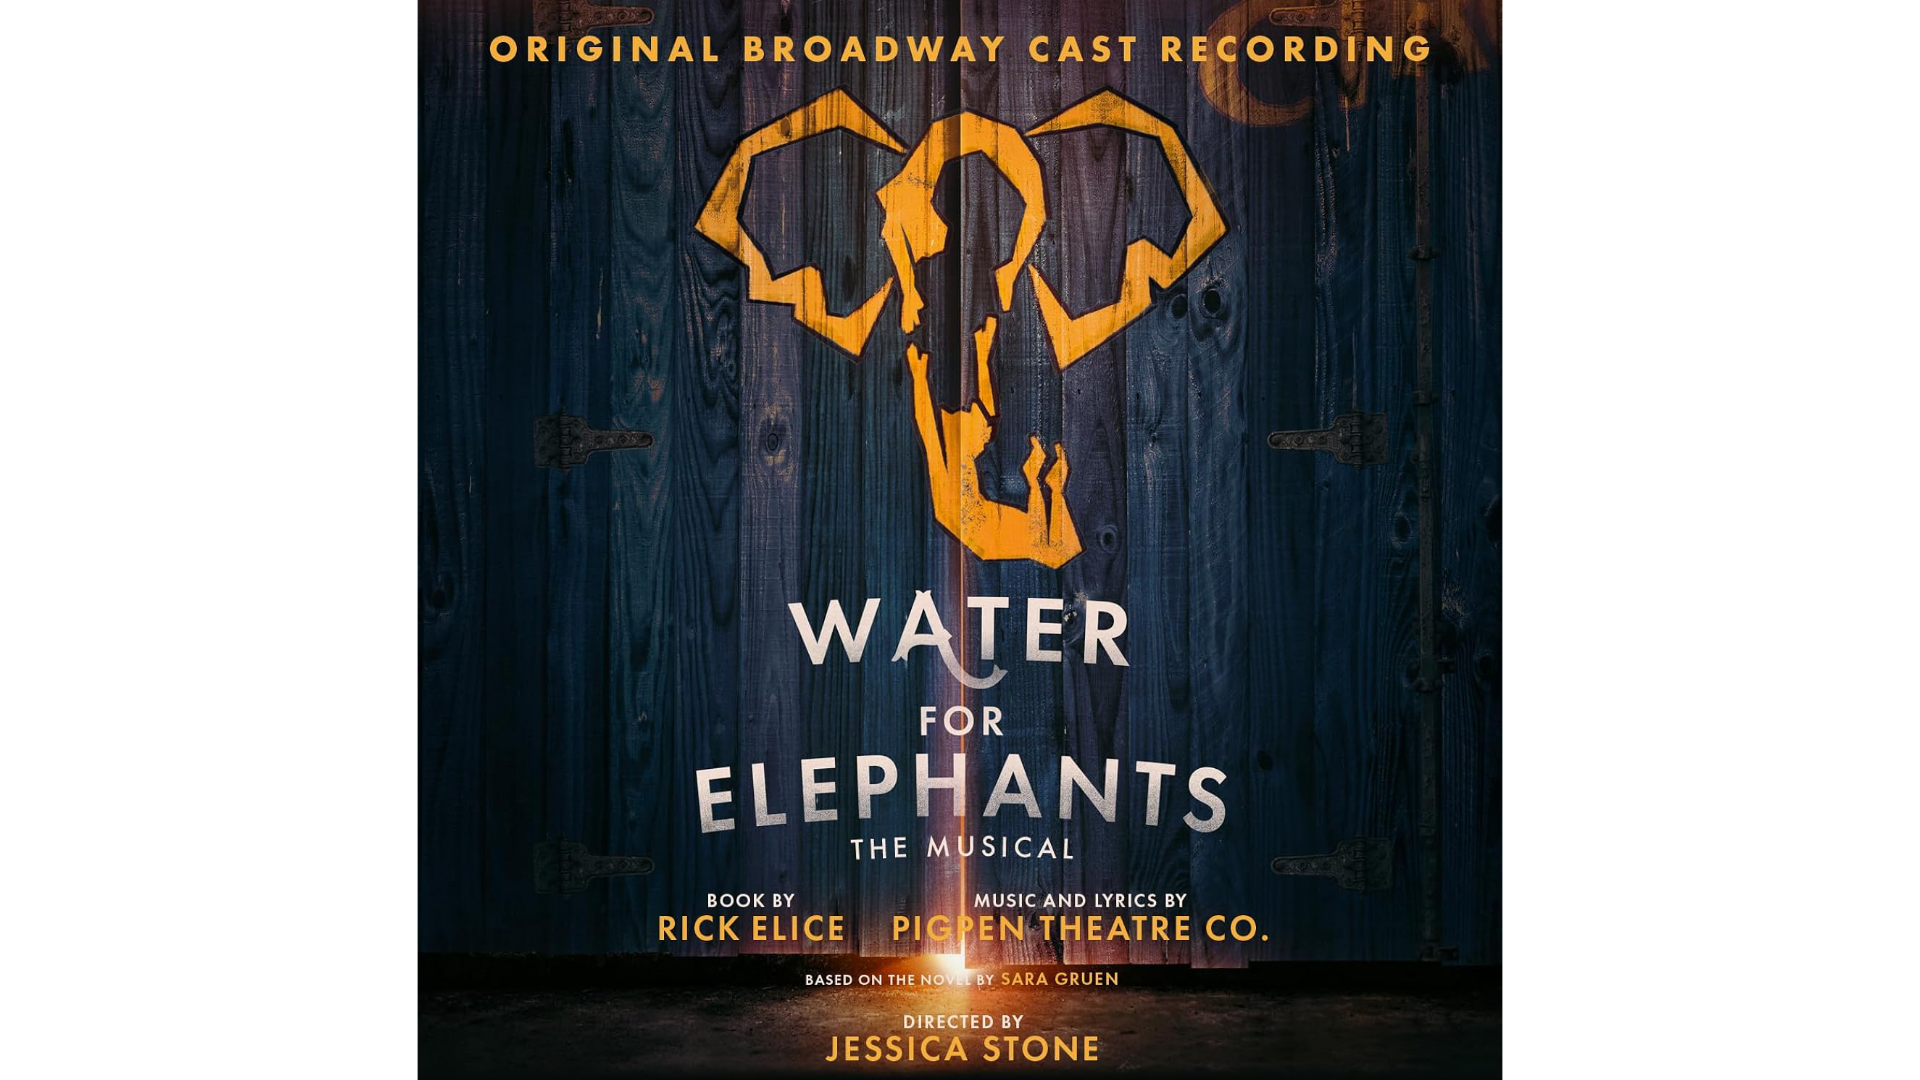 Water For Elephants Cast Recording Album Cover